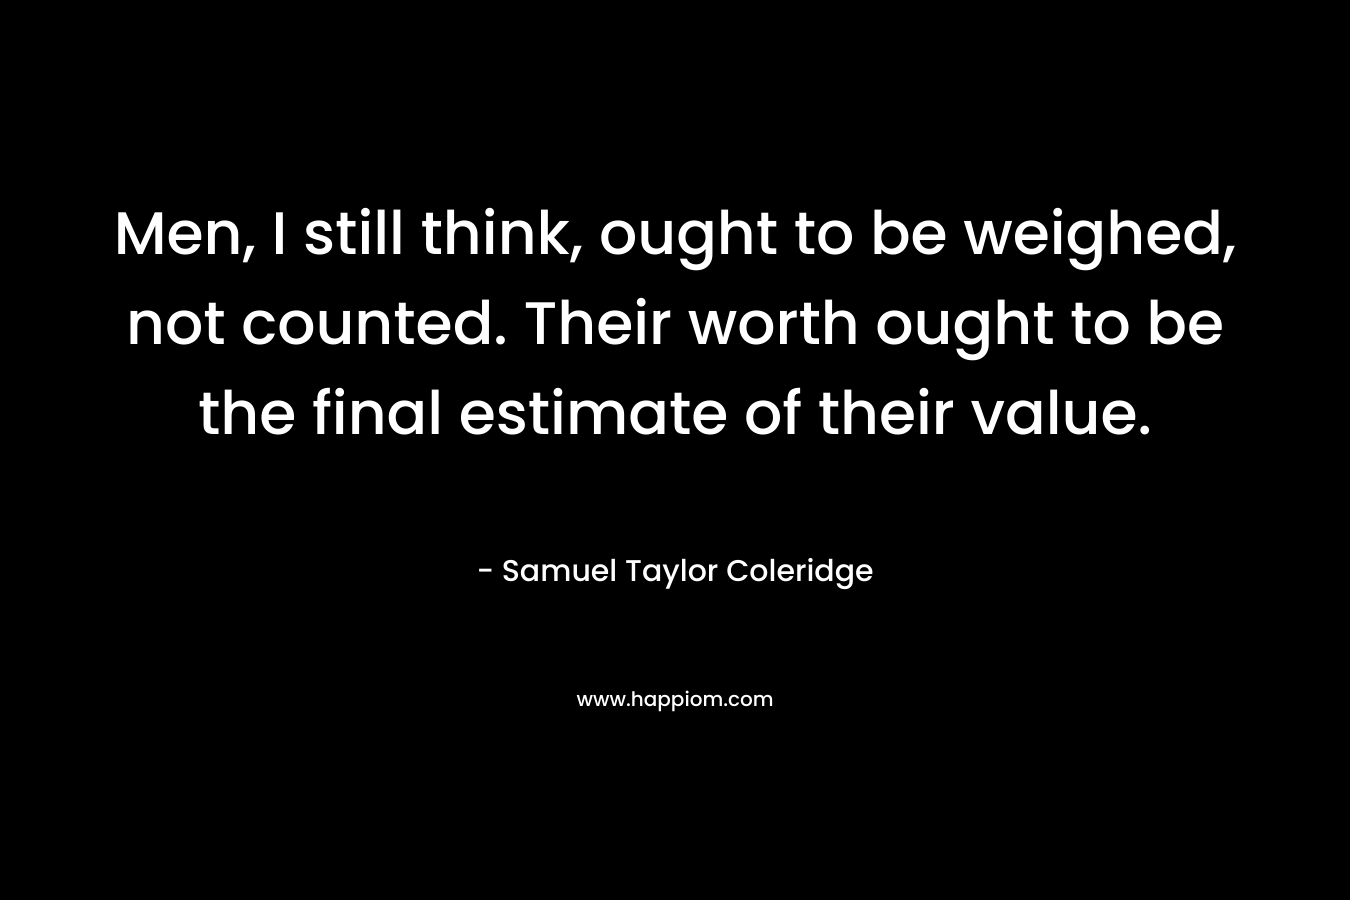 Men, I still think, ought to be weighed, not counted. Their worth ought to be the final estimate of their value.